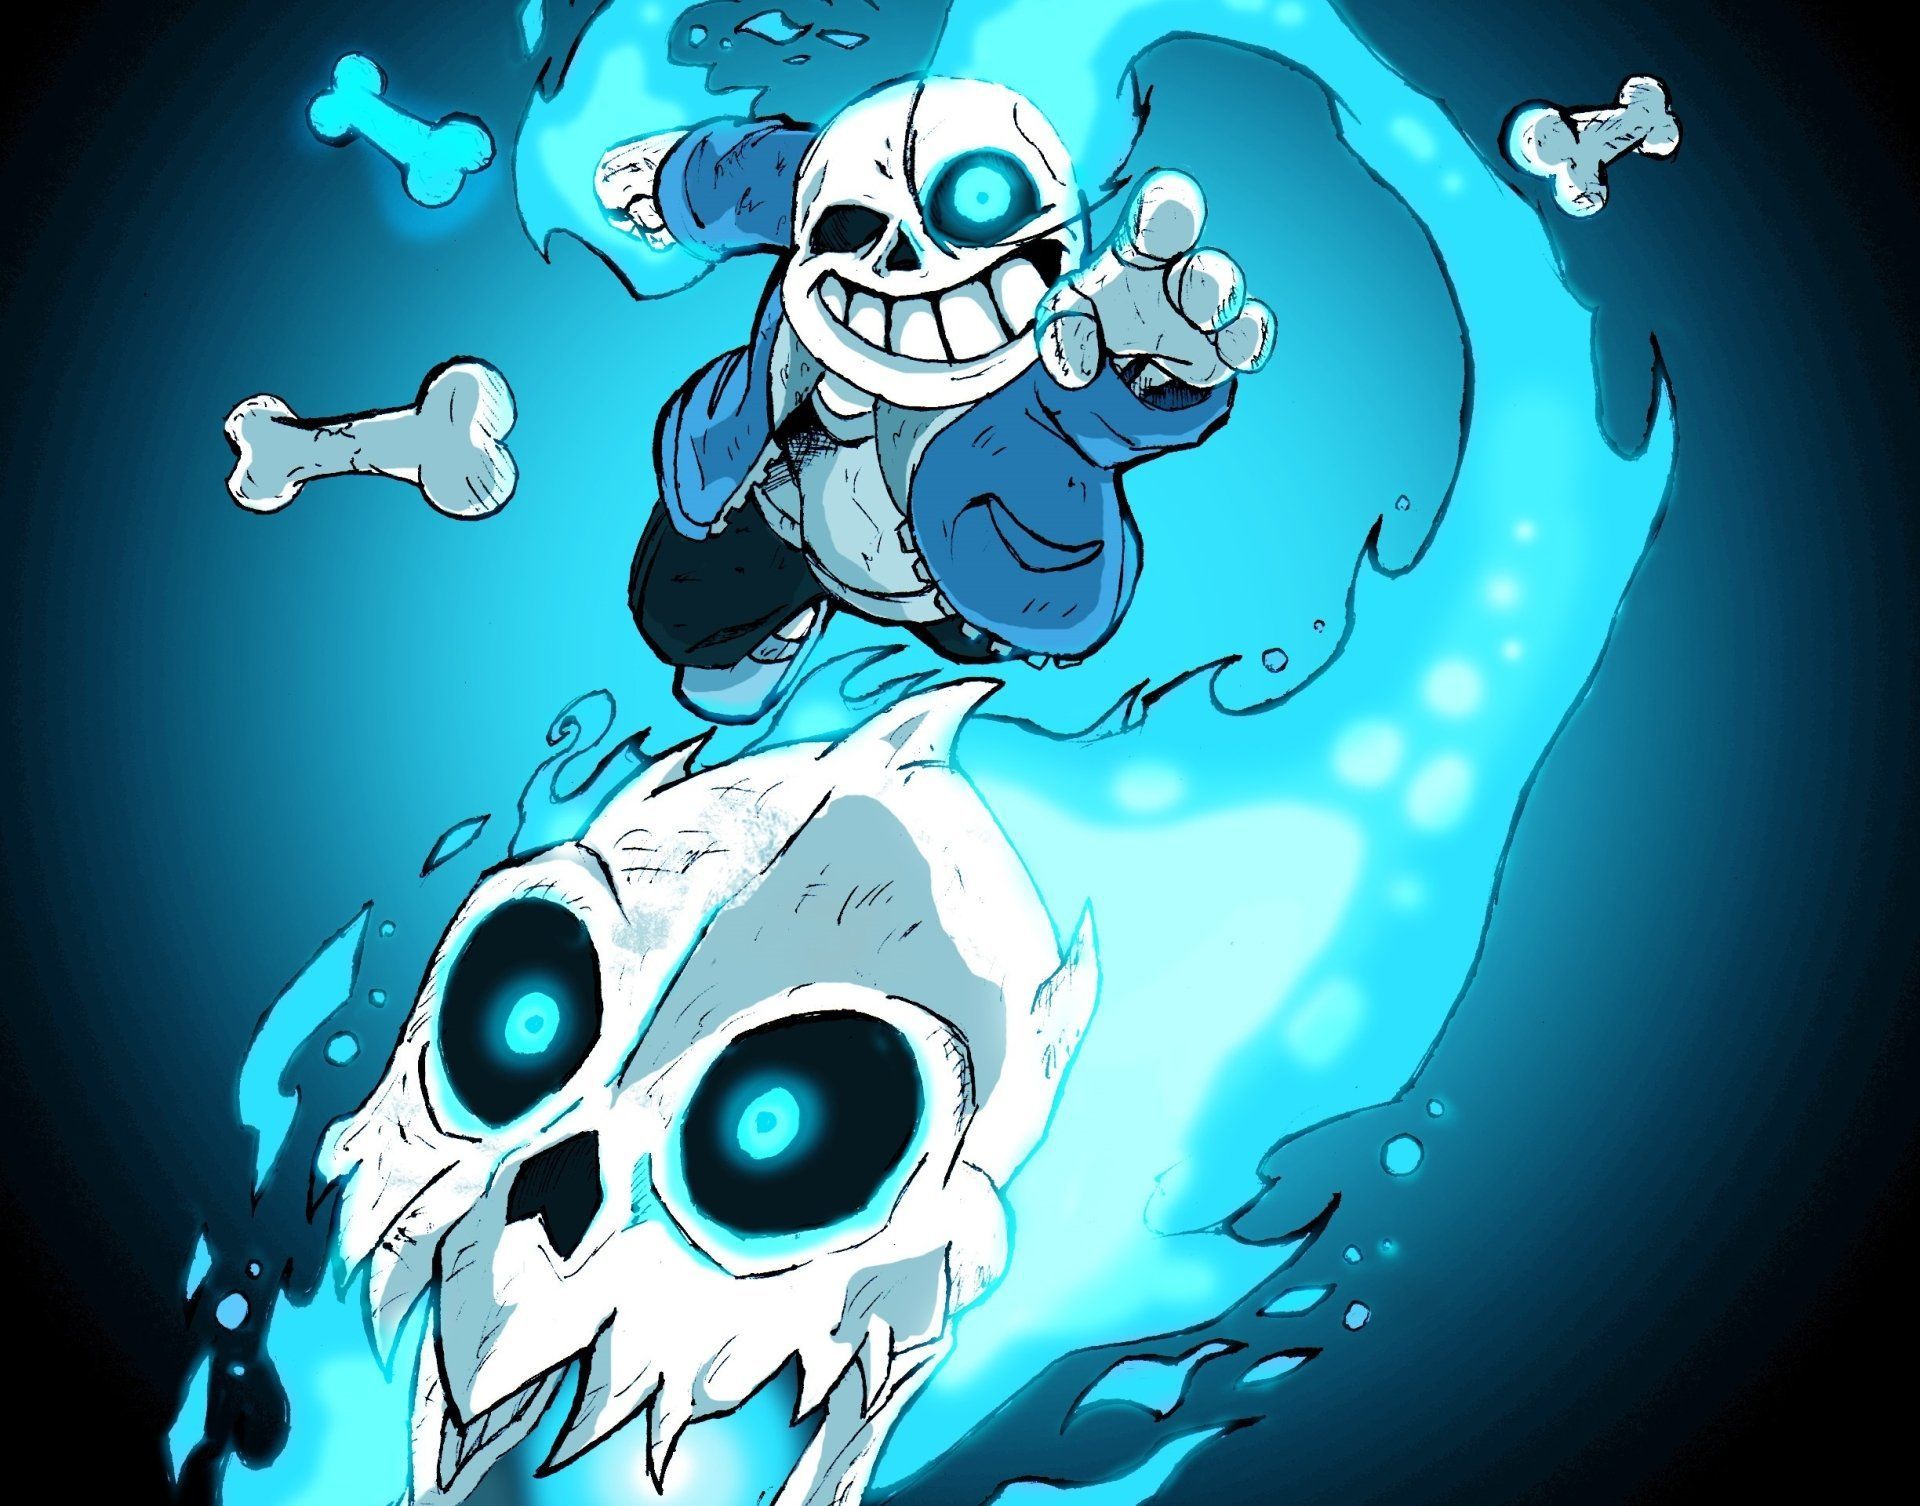 Sans Wallpaper Background Image. View, download, comment, and rate. Undertale, Undertale art, Anime